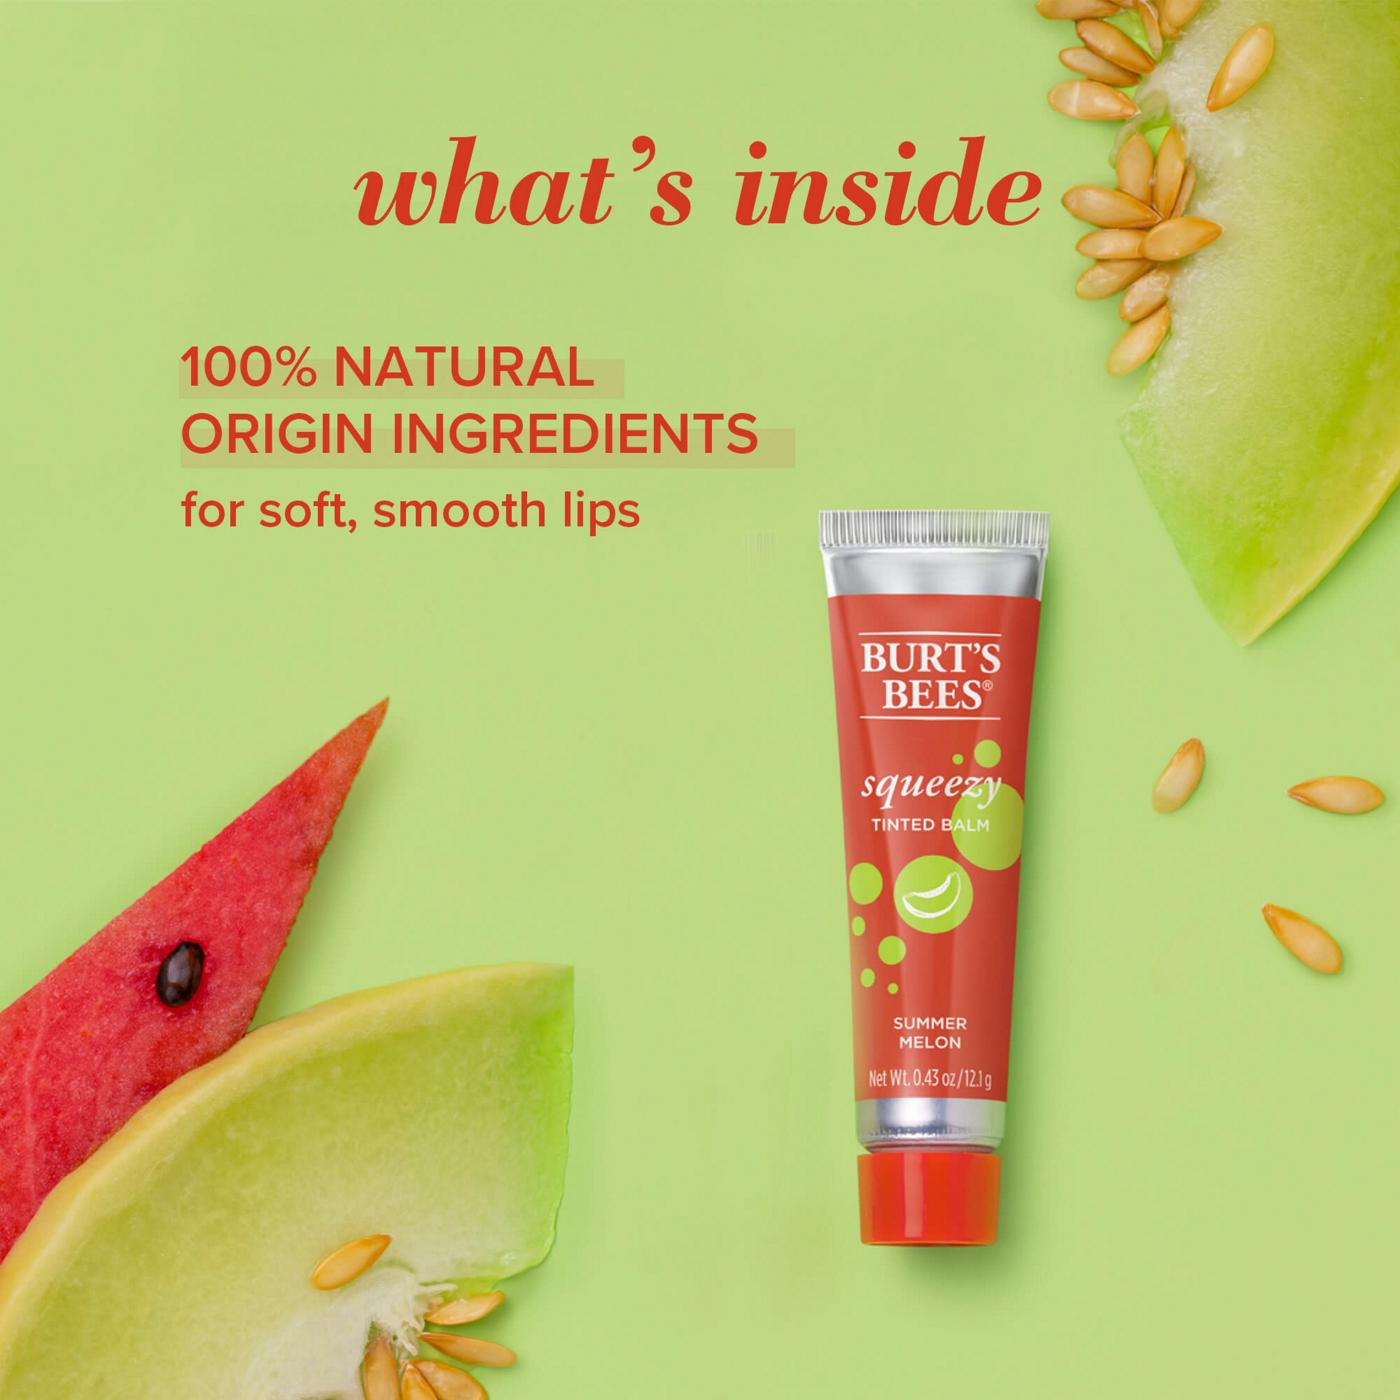 Burt's Bees Squeezy Tinted Balm - Summer Melon; image 4 of 10